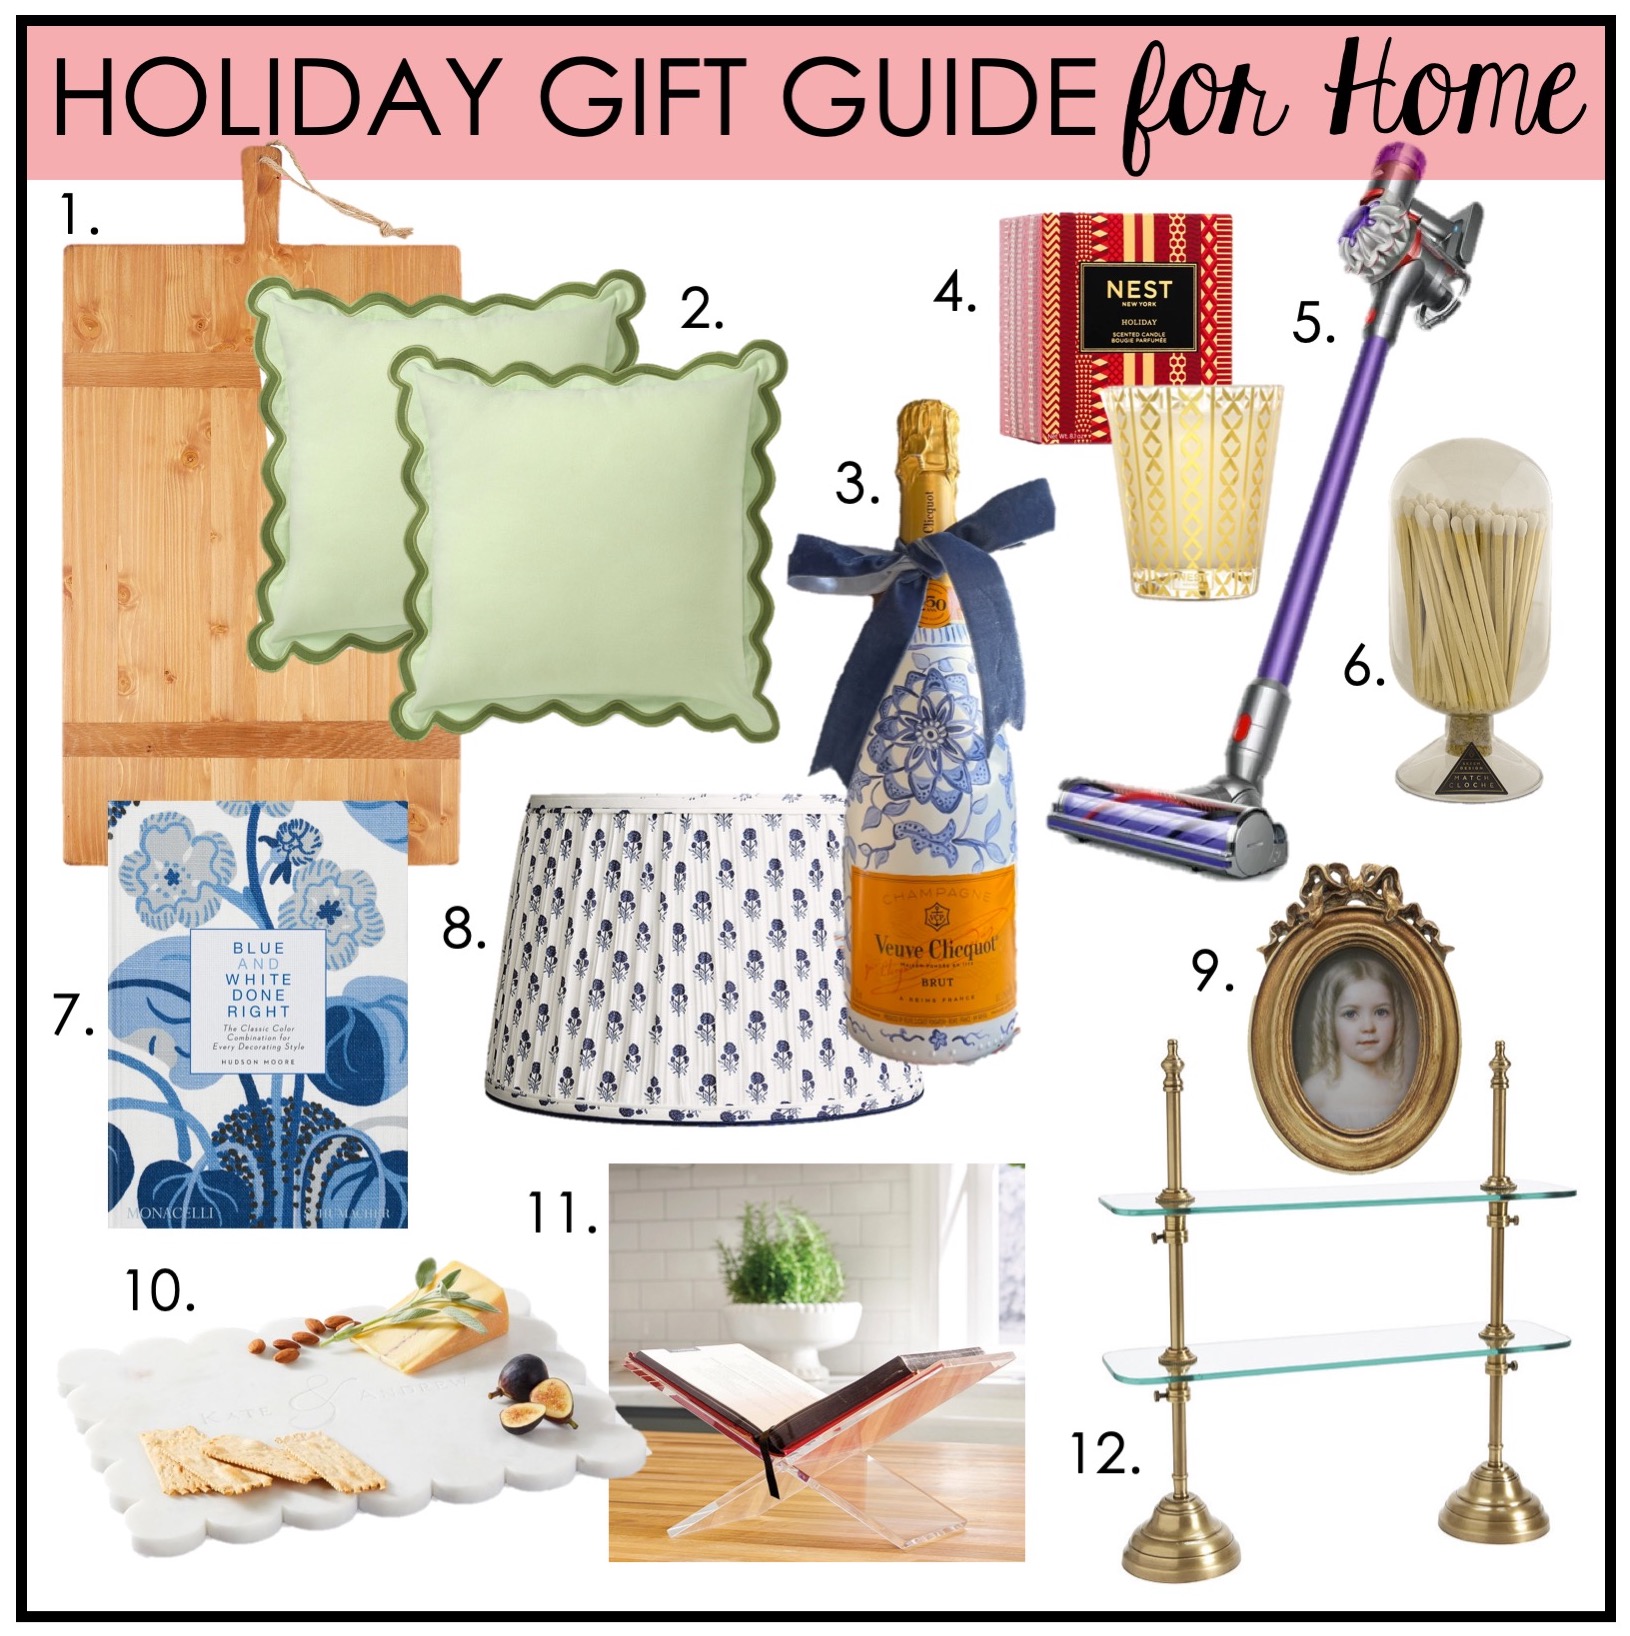 GIFT GUIDE HOME - House of Hargrove